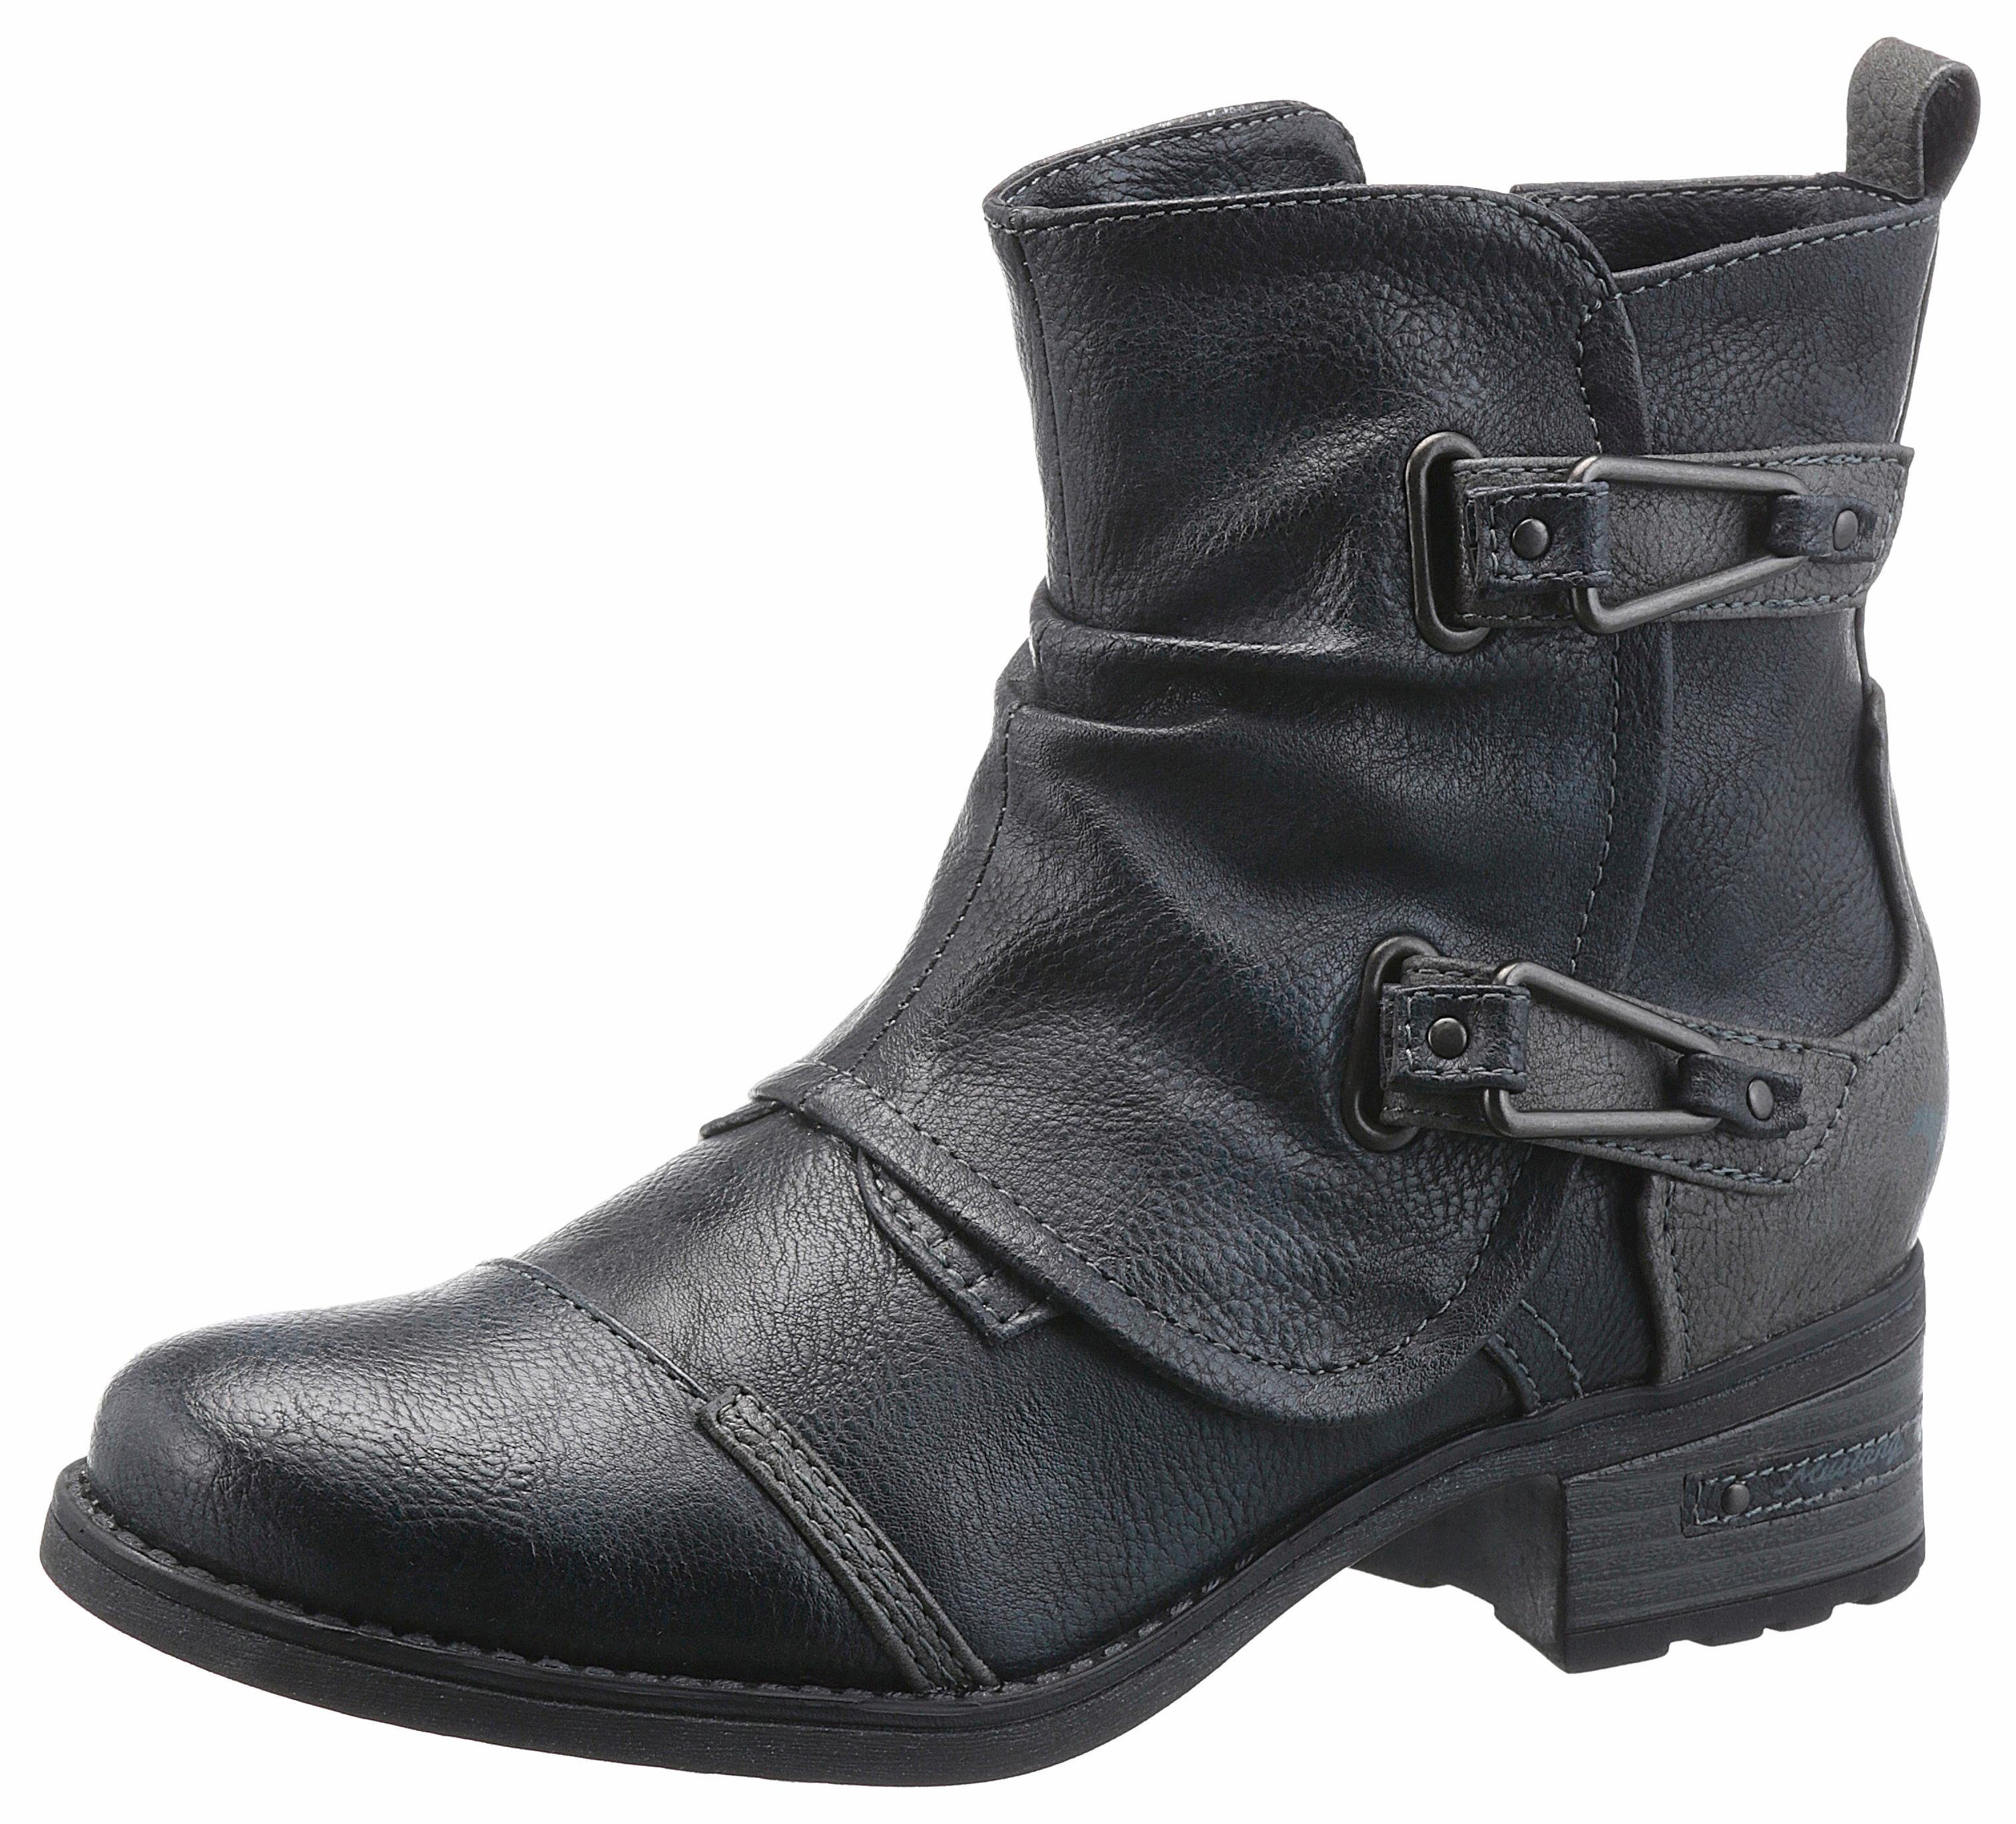 Otto - Mustang Shoes NU 15% KORTING: Mustang Shoes cowboy boots